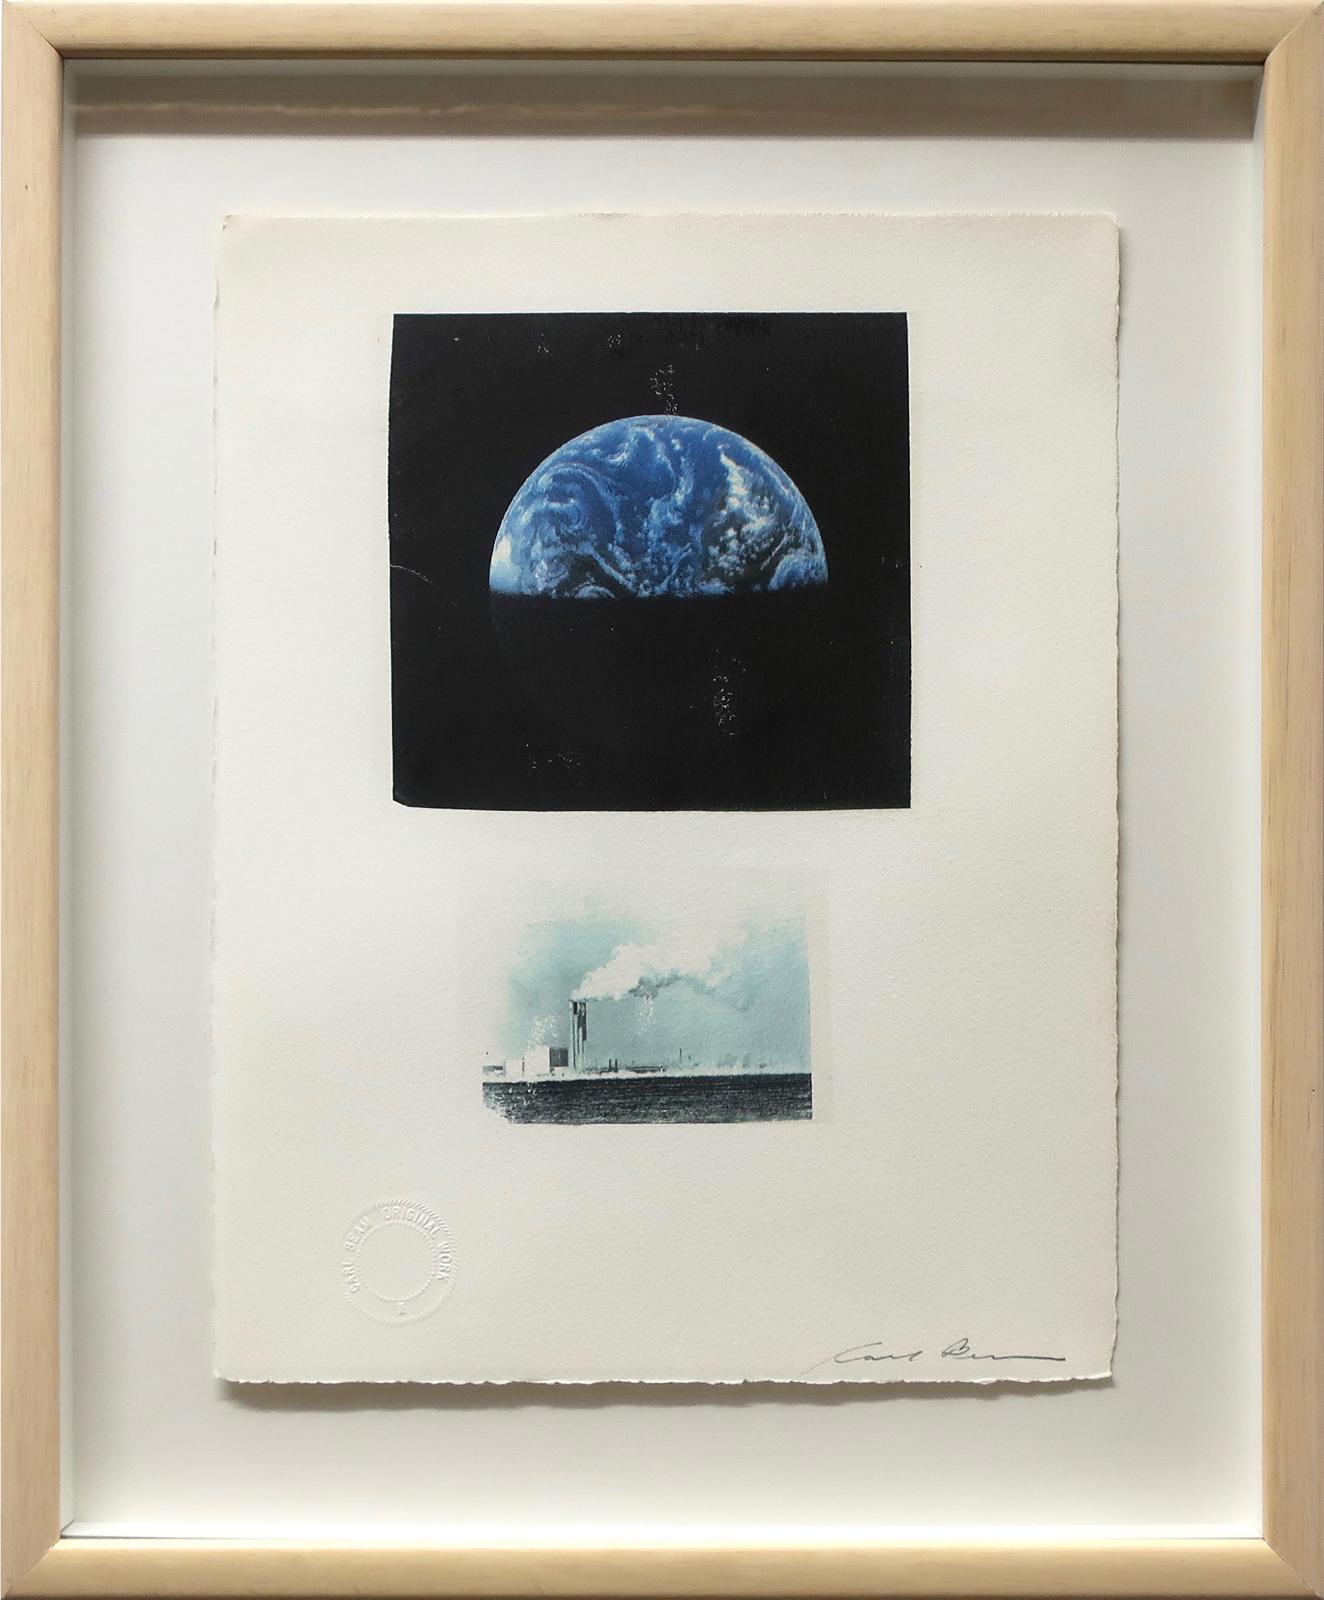 Carl Beam (1943-2005) - Untitled (Blue Earth - Polluters)